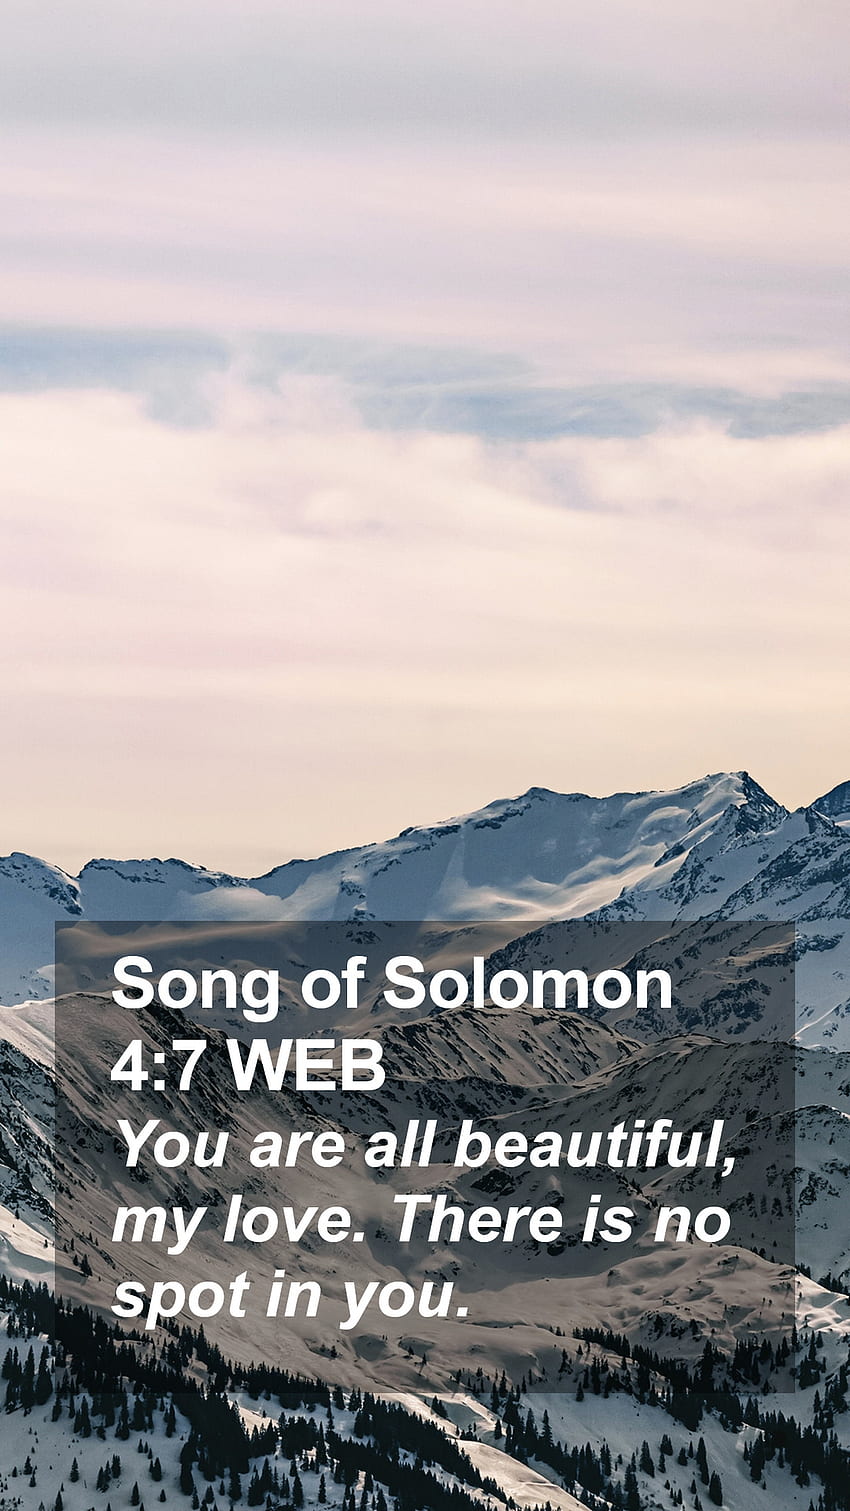 Song of Solomon 4:7 WEB Mobile Phone - You are all beautiful, my love. There is no spot, Christian Song HD phone wallpaper